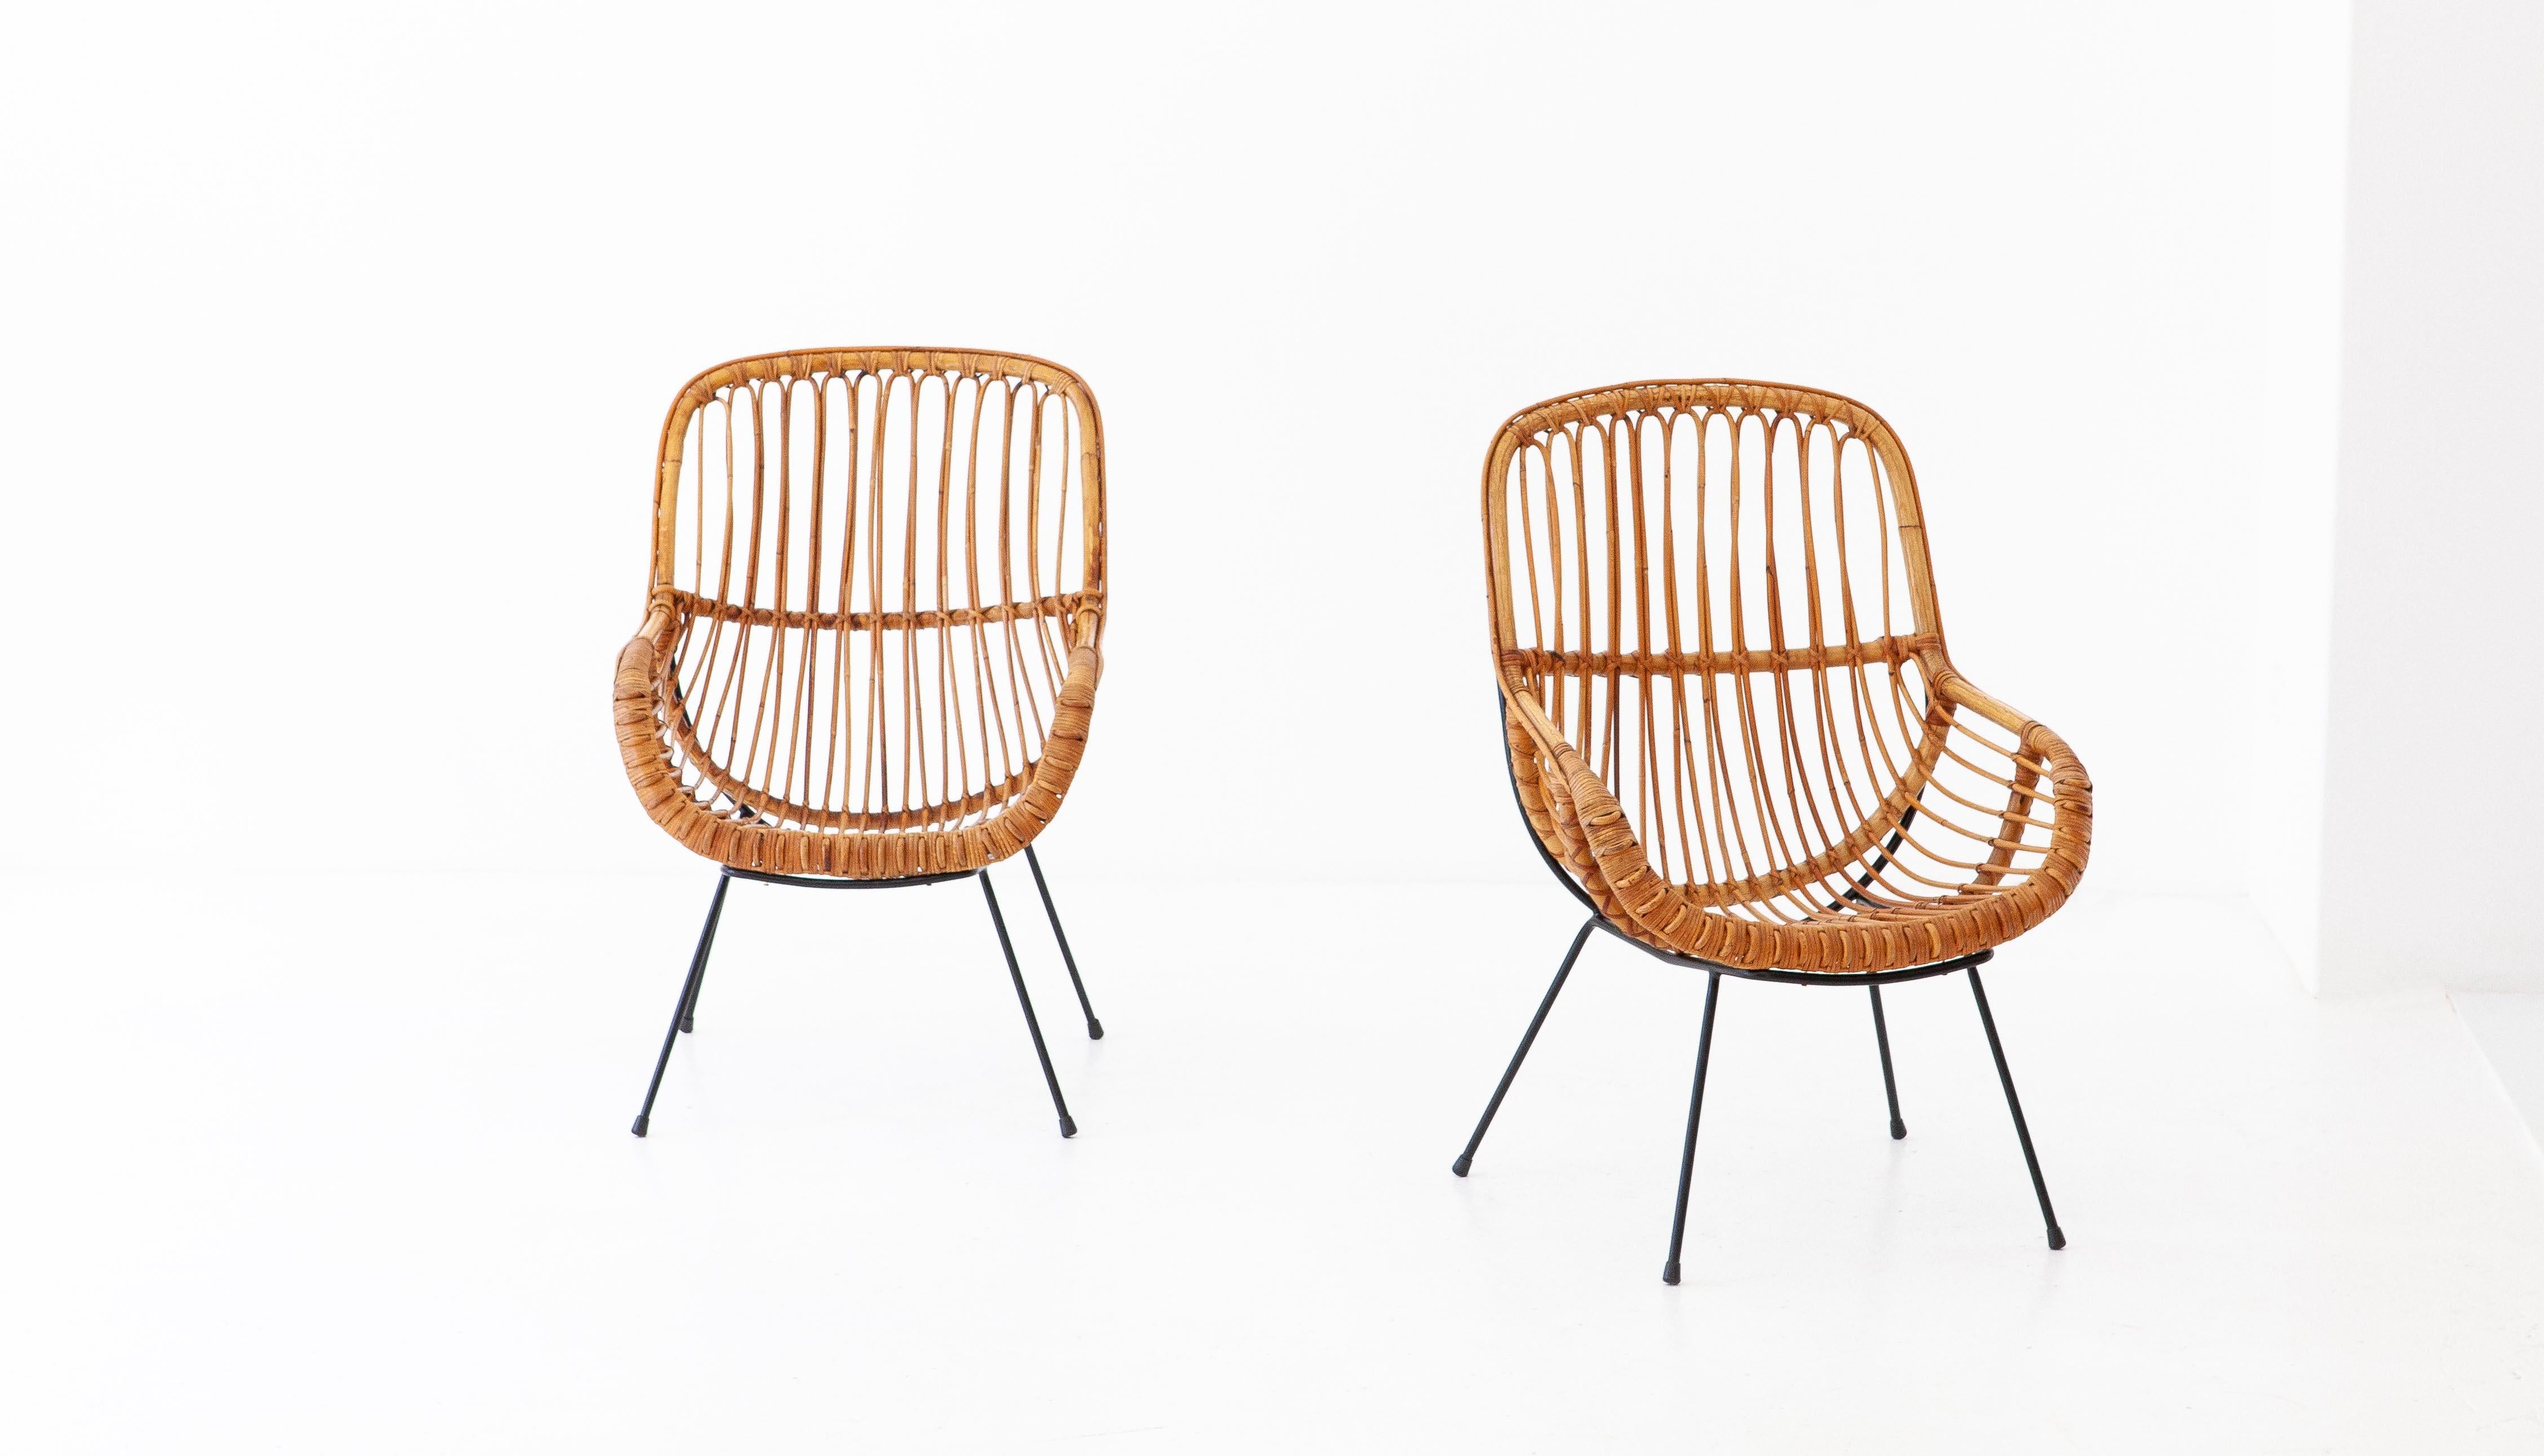 Pair of Italian Rattan, Wicker and Iron Armchairs, 1950s For Sale 3